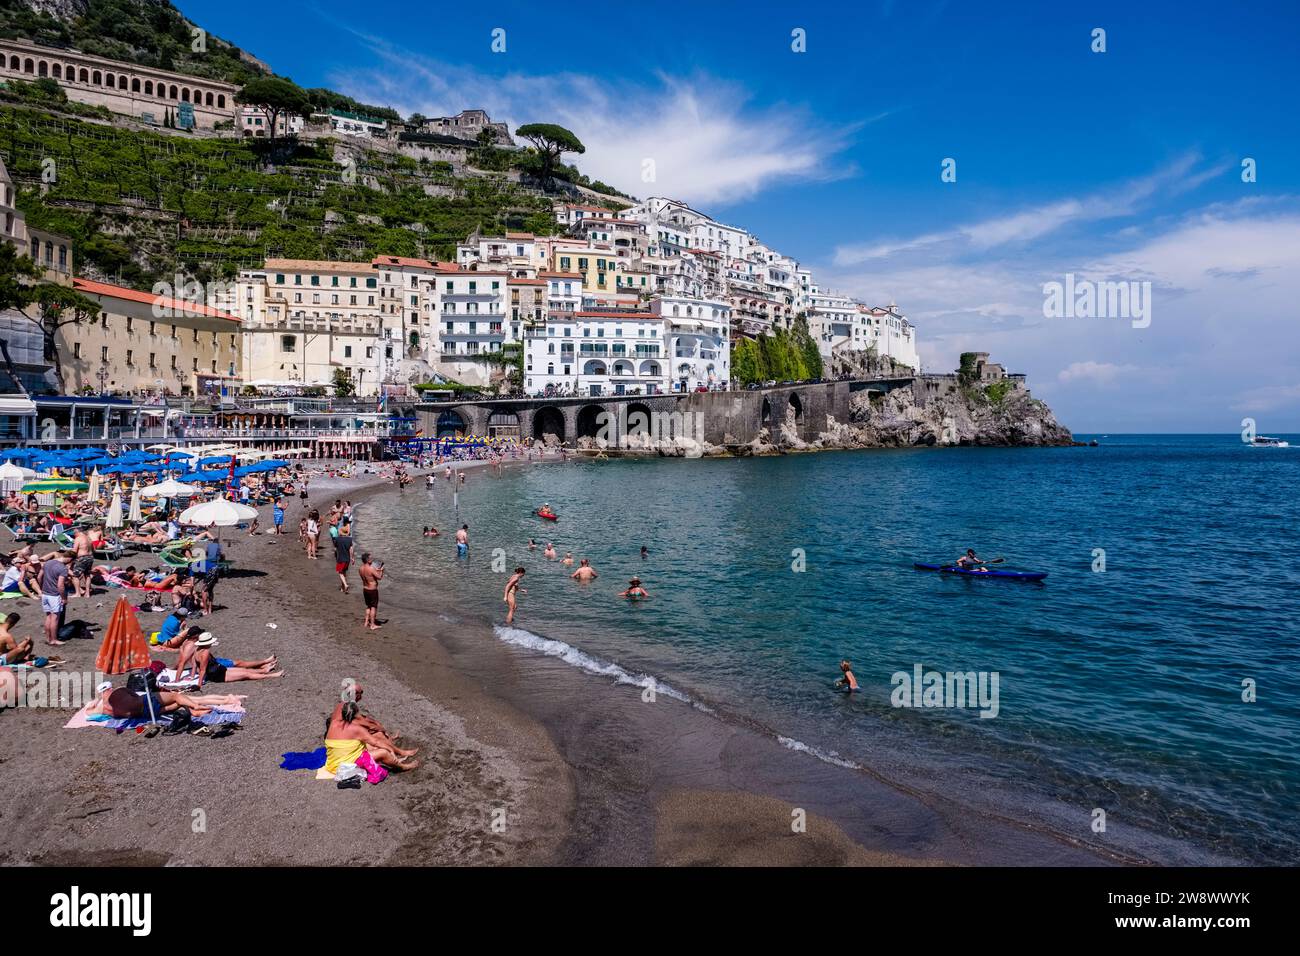 Houses of the town of Amalfi on the Amalfi Coast, which lies on the coast in a valley leading to the Mediterranean Sea, seen over the beach. Stock Photo